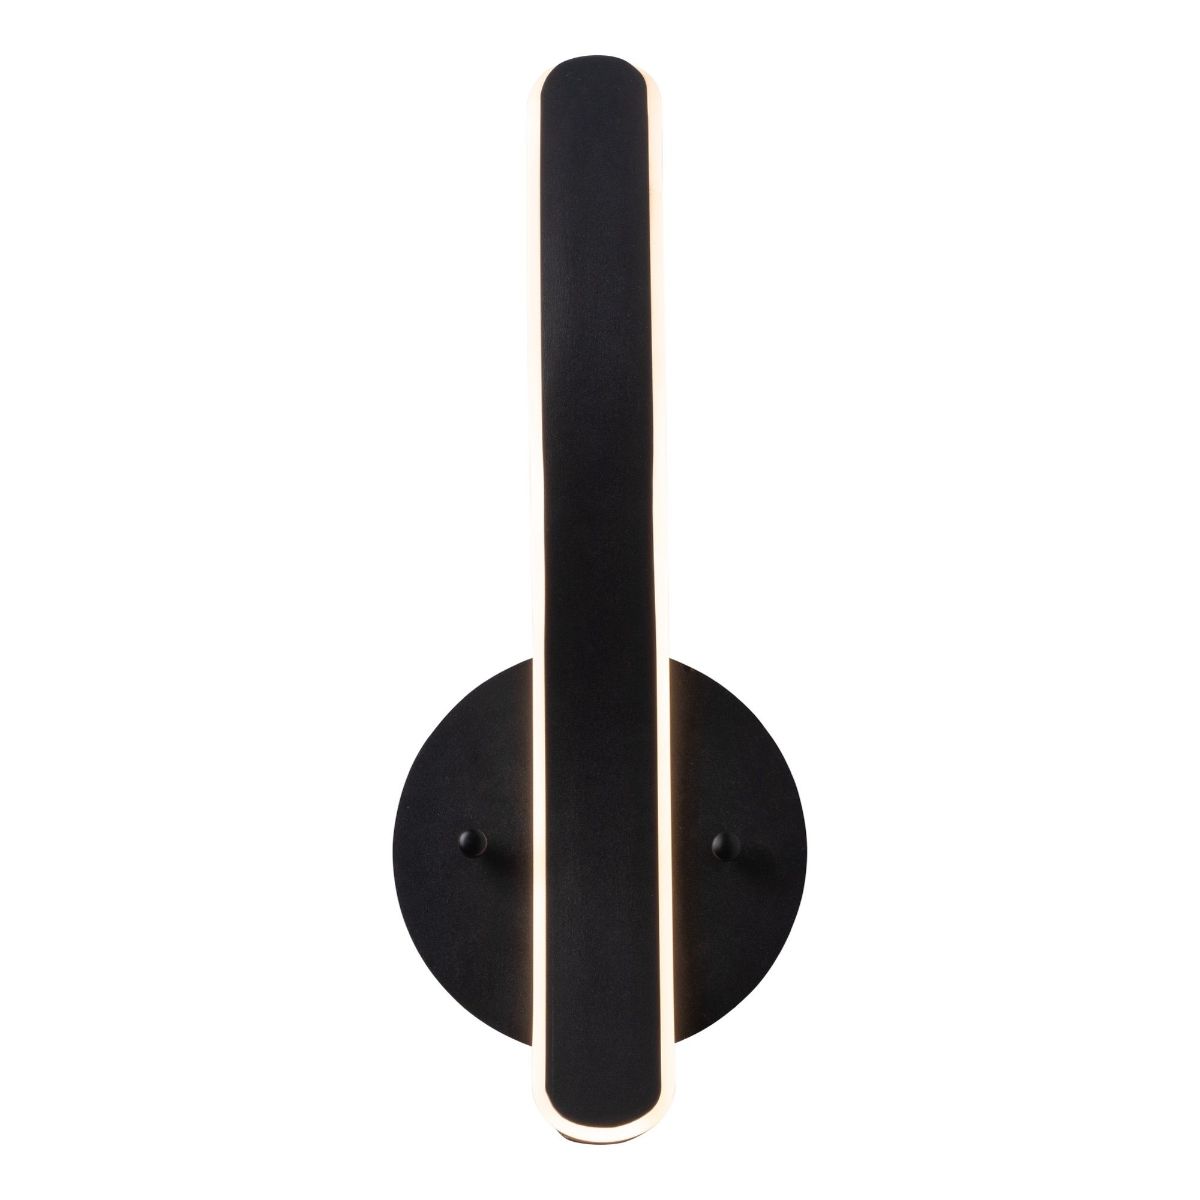 Sirius 15 In. Wall Sconce Black Finish